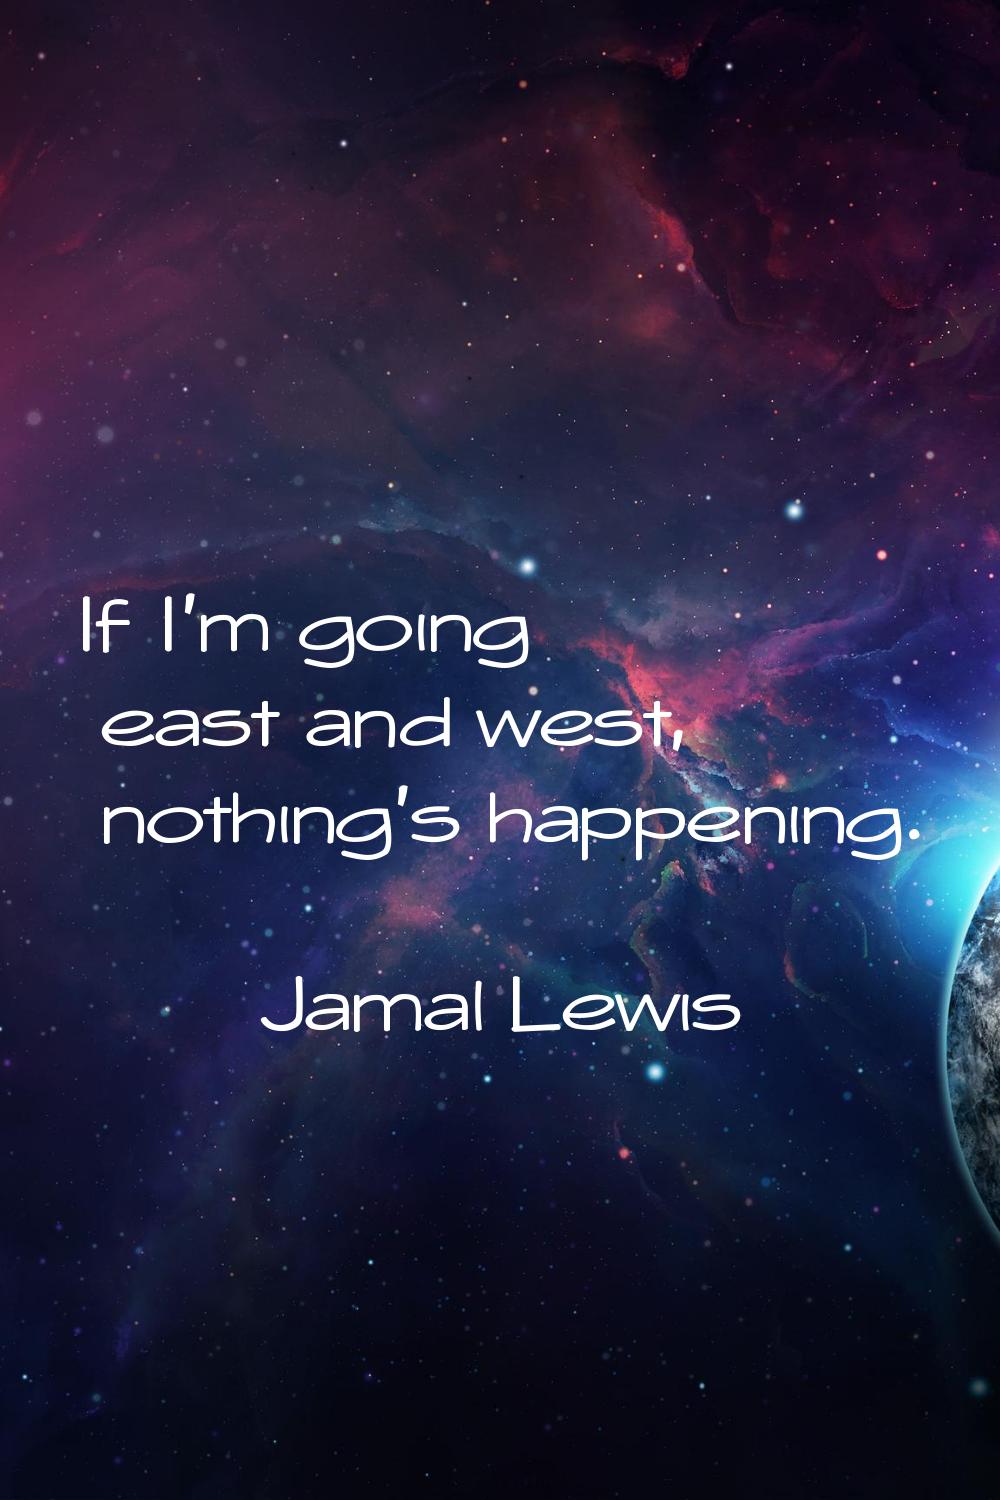 If I'm going east and west, nothing's happening.